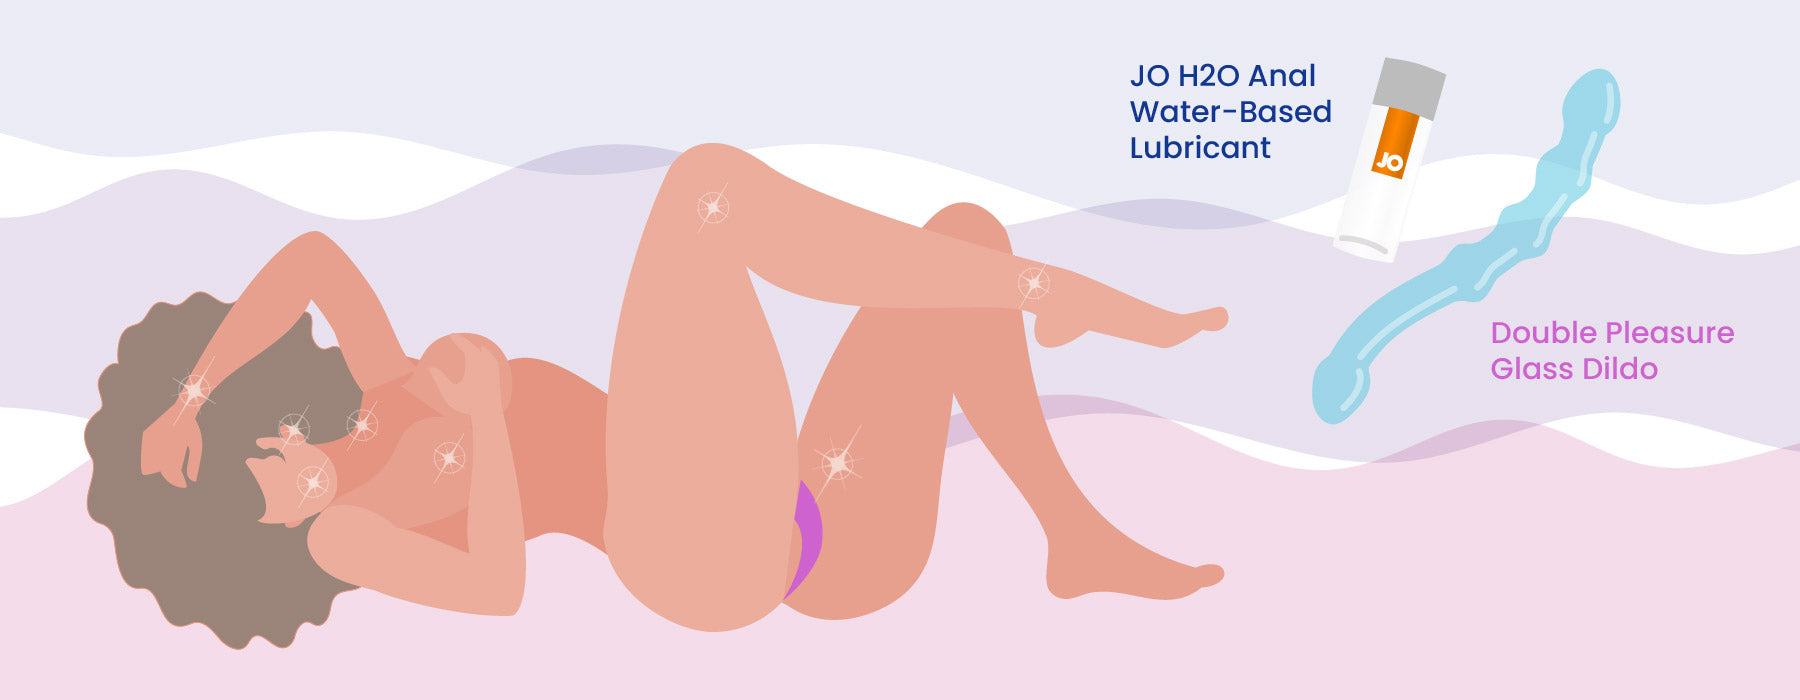 JO H2O Anal Water-Based Lubricant and Double Pleasure Glass Dildo